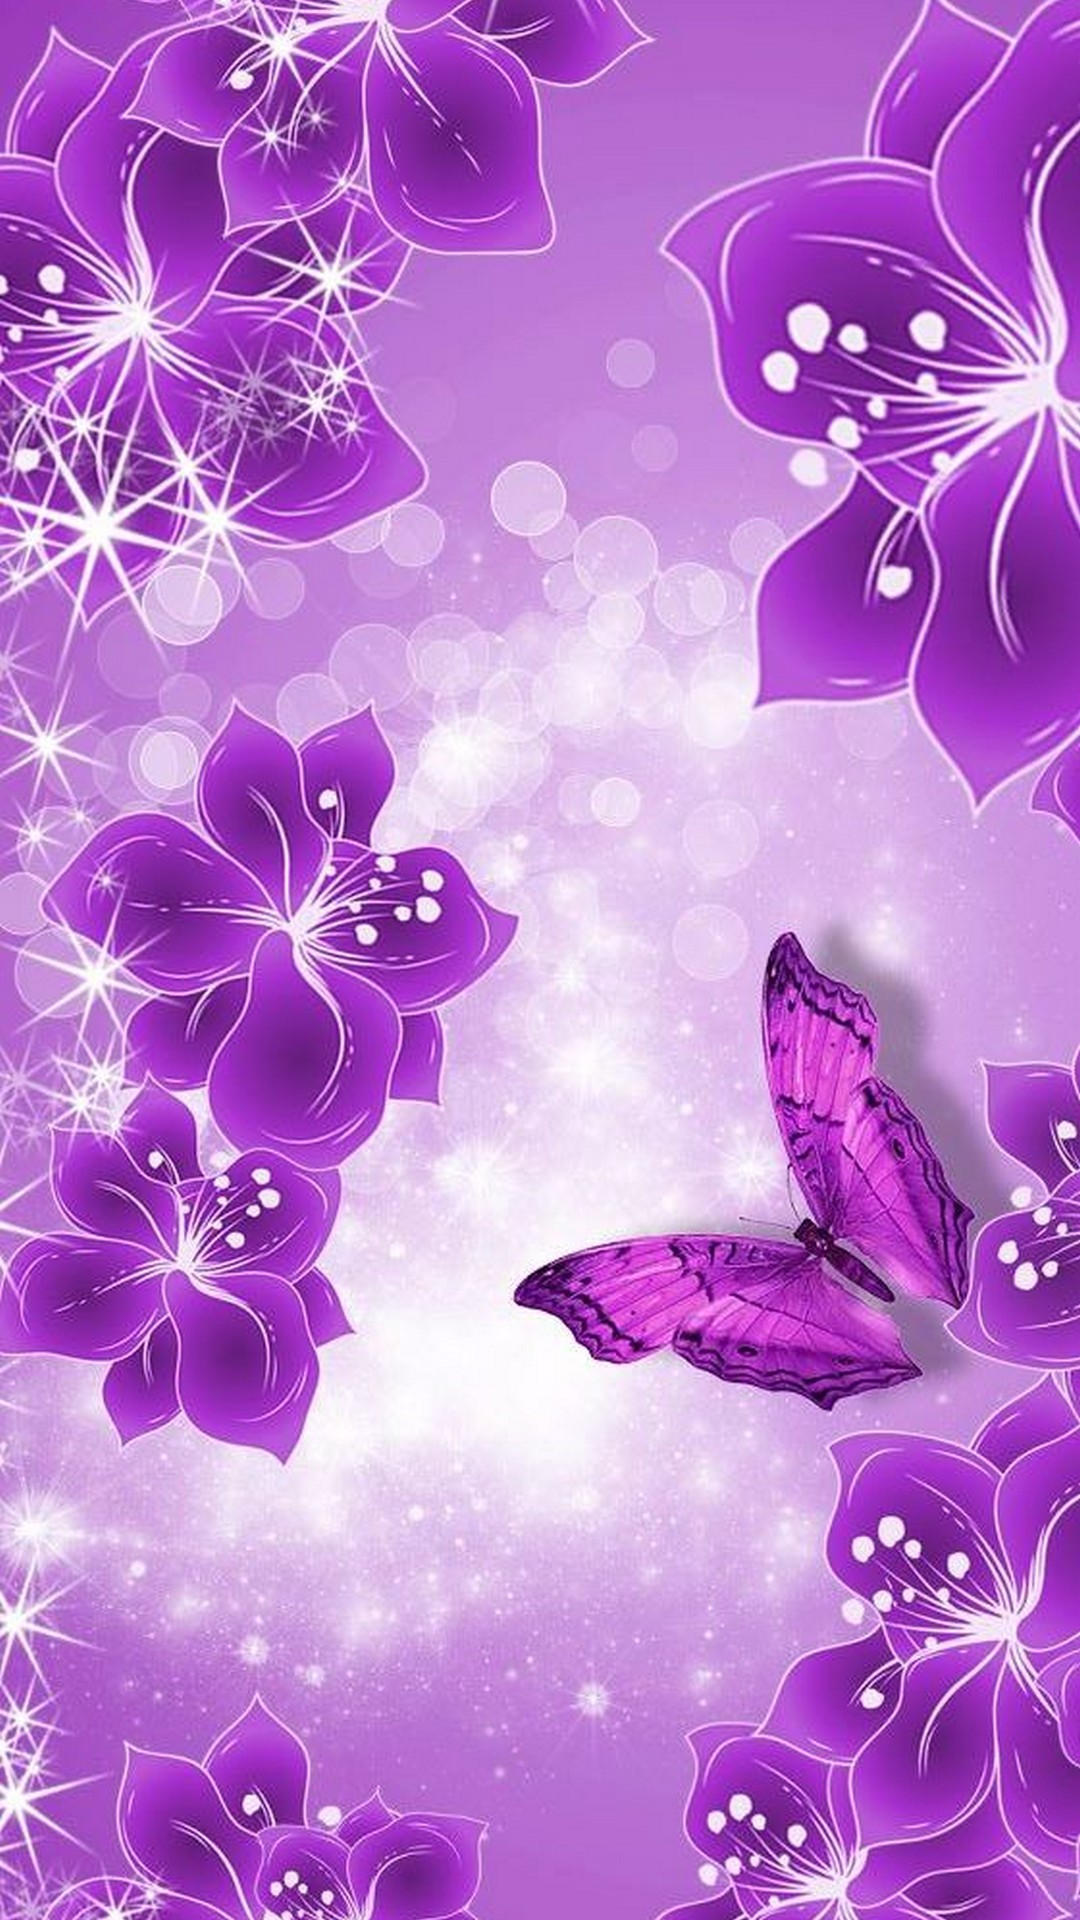 Purple Butterfly Hd Wallpapers For Mobile - Wall Paper Design Violet - HD Wallpaper 